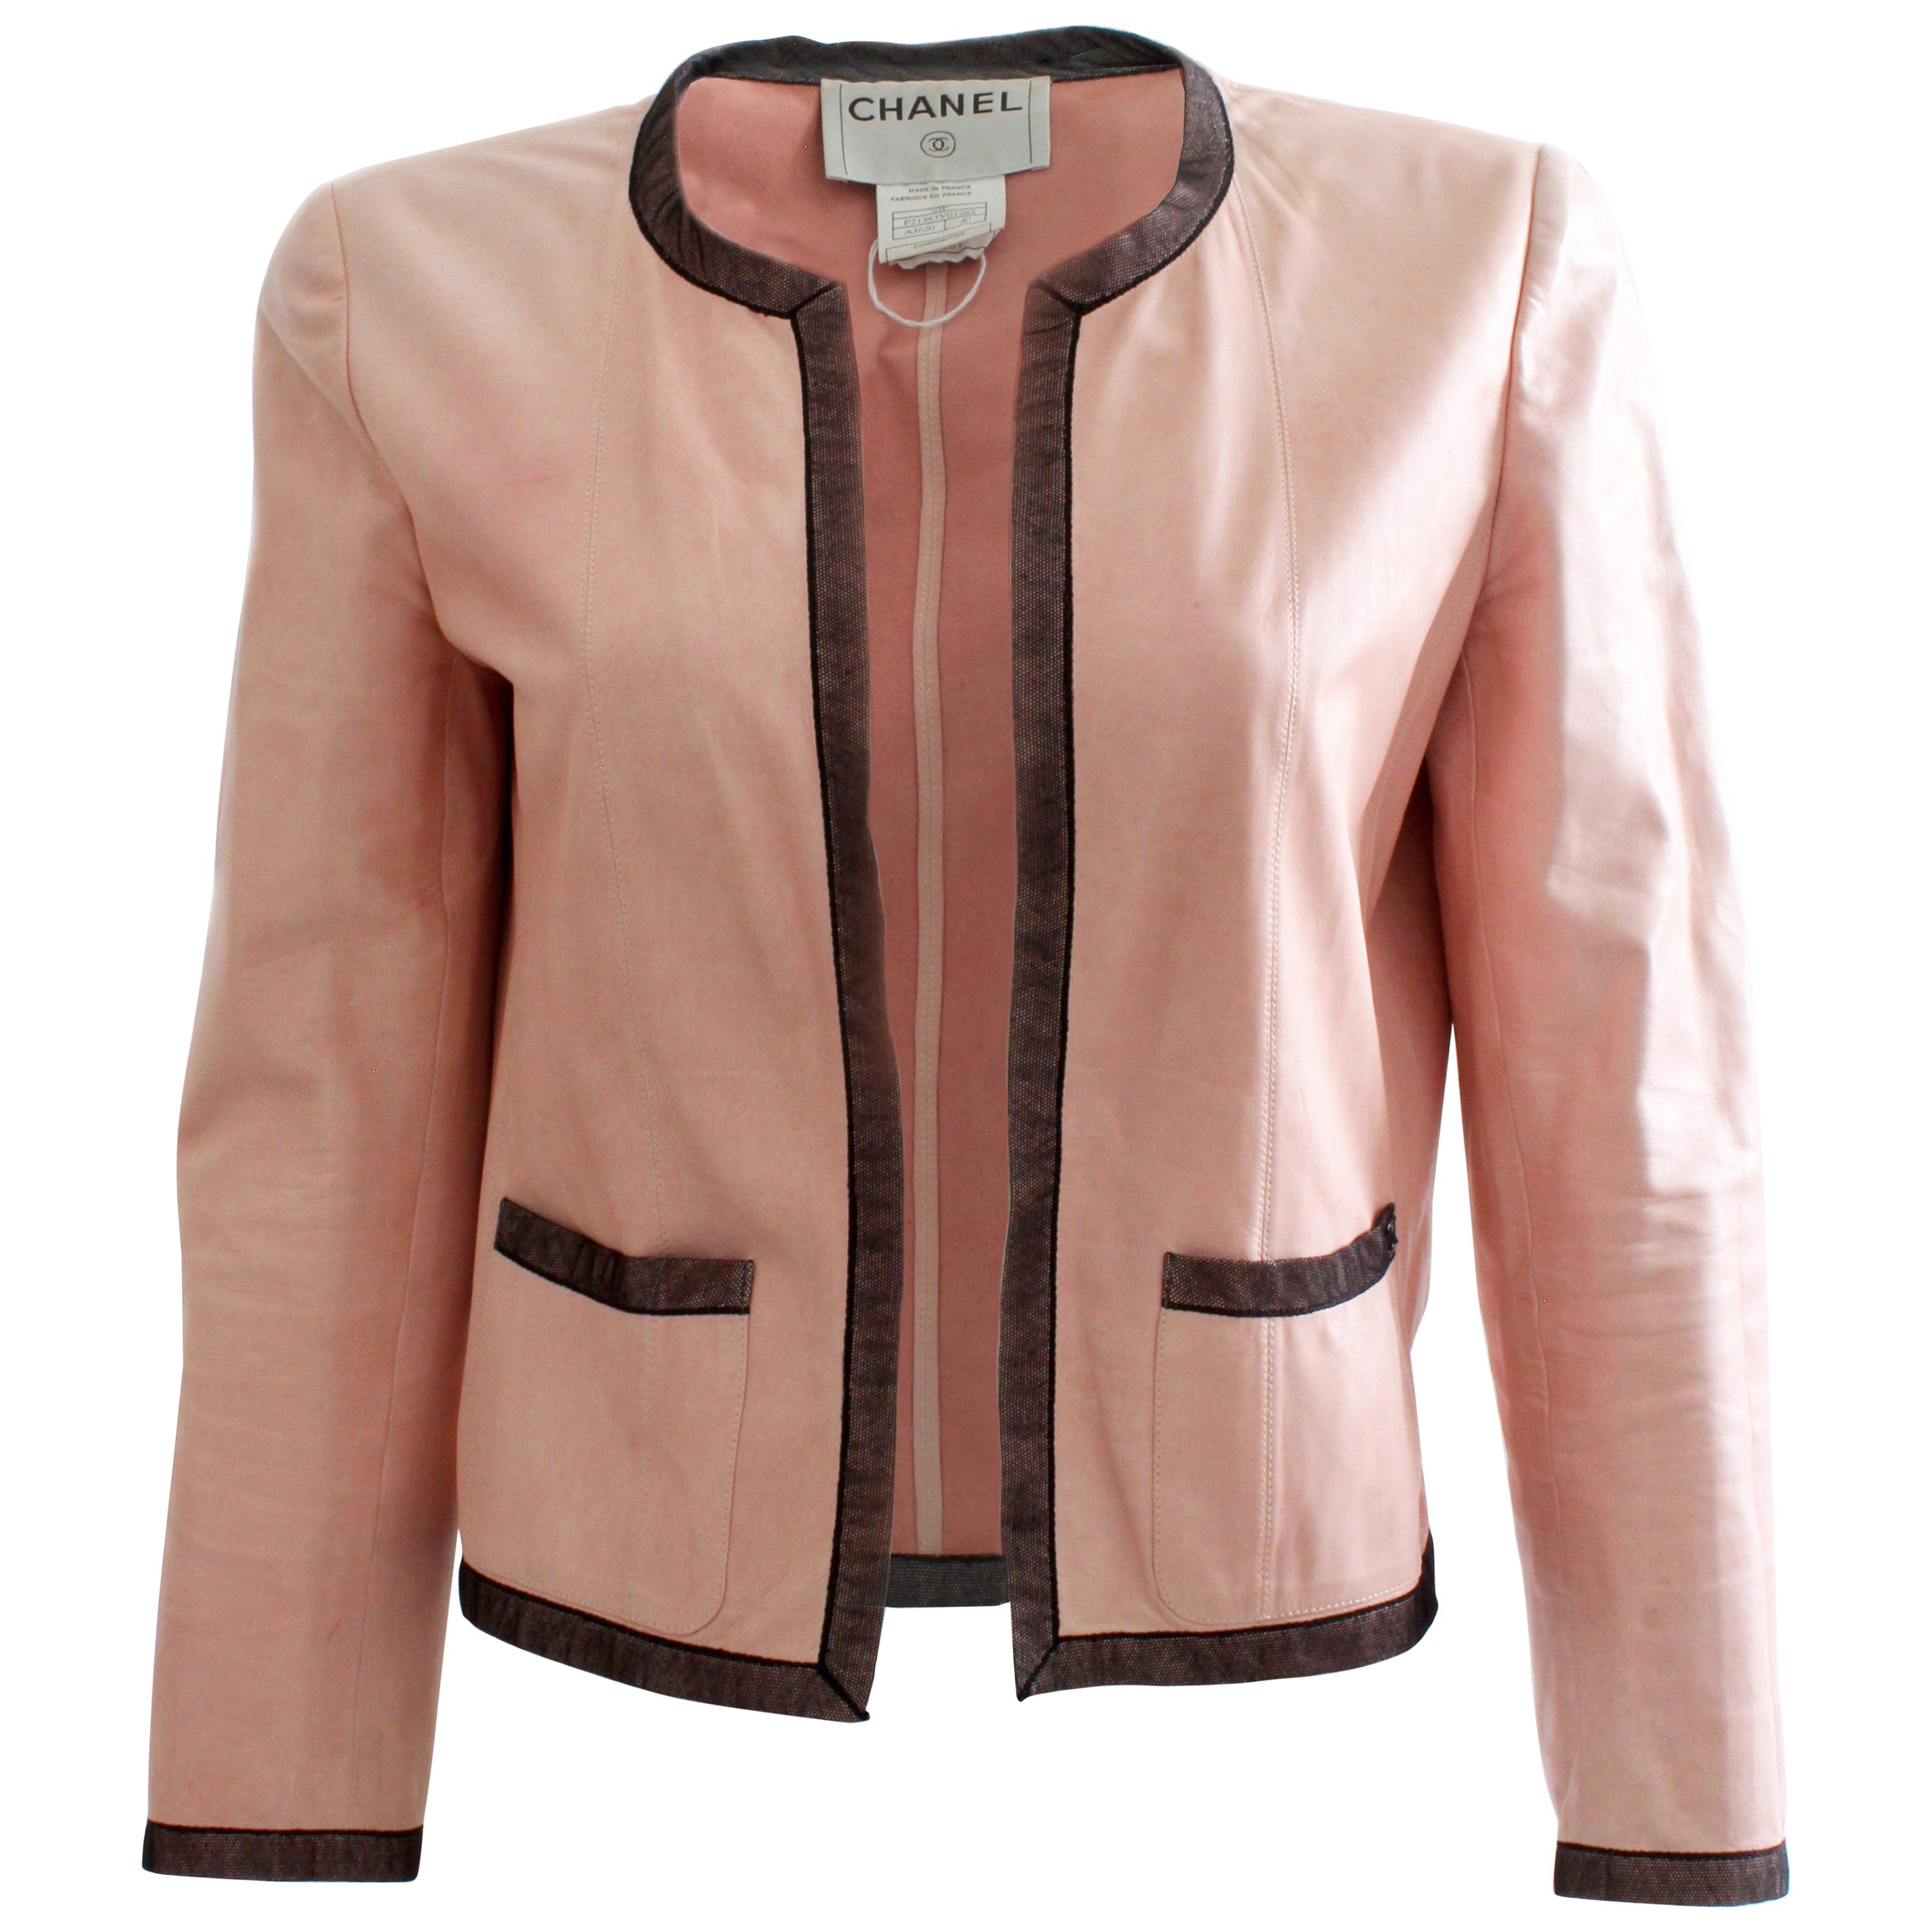 Chanel - Authenticated Jacket - Leather Pink for Women, Very Good Condition